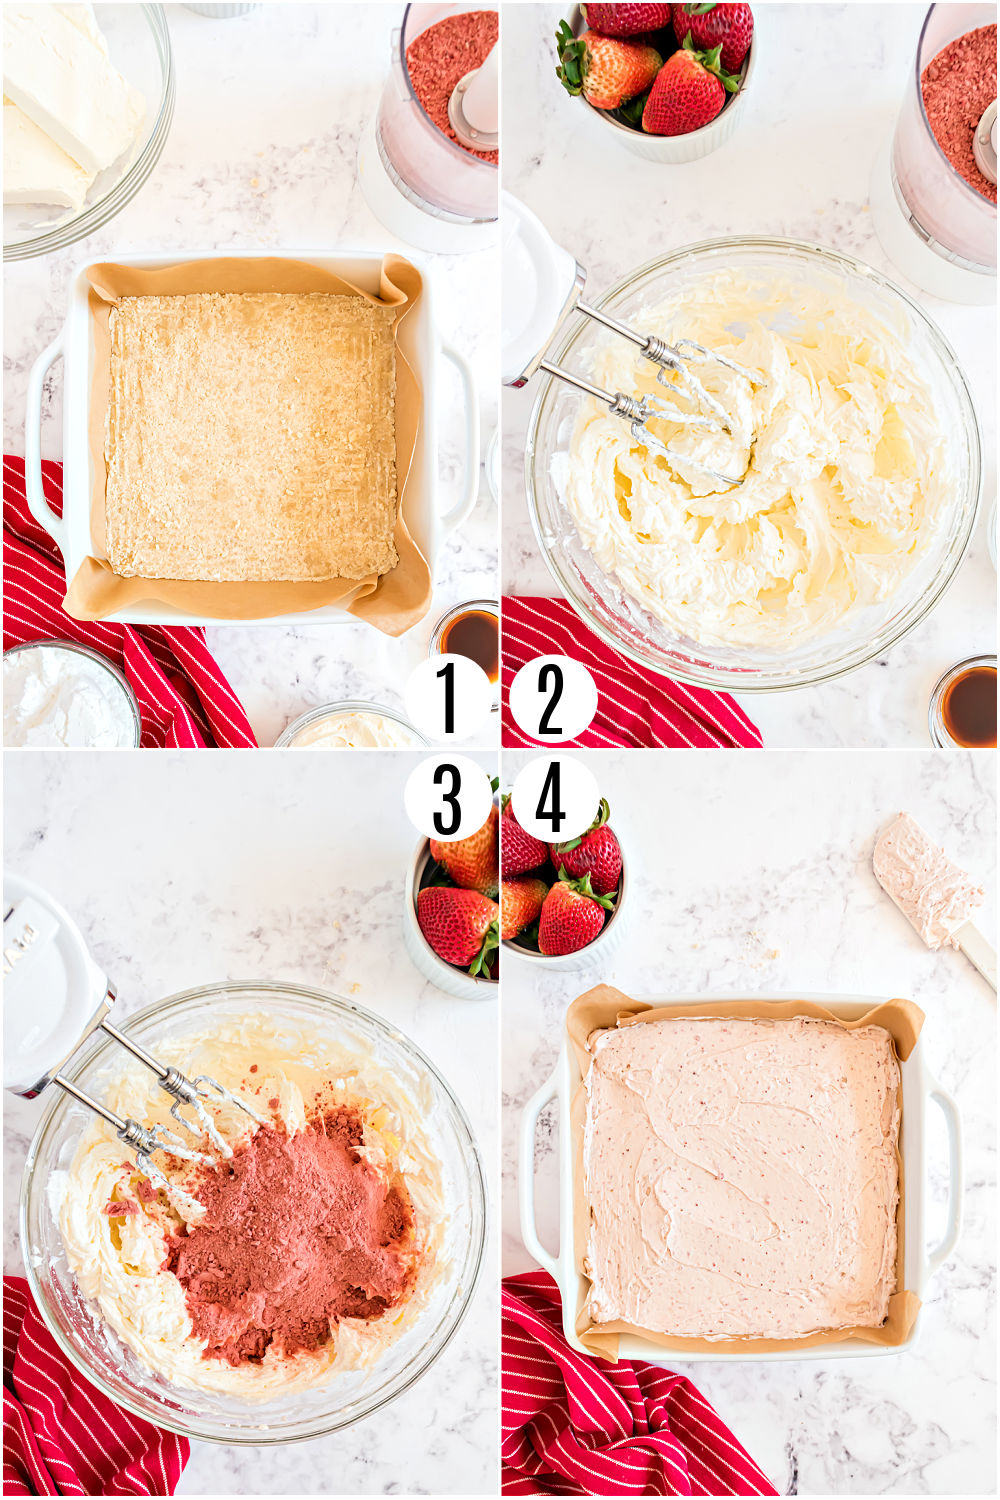 Step by step photos showing how to make sugar free strawberry cheesecake.